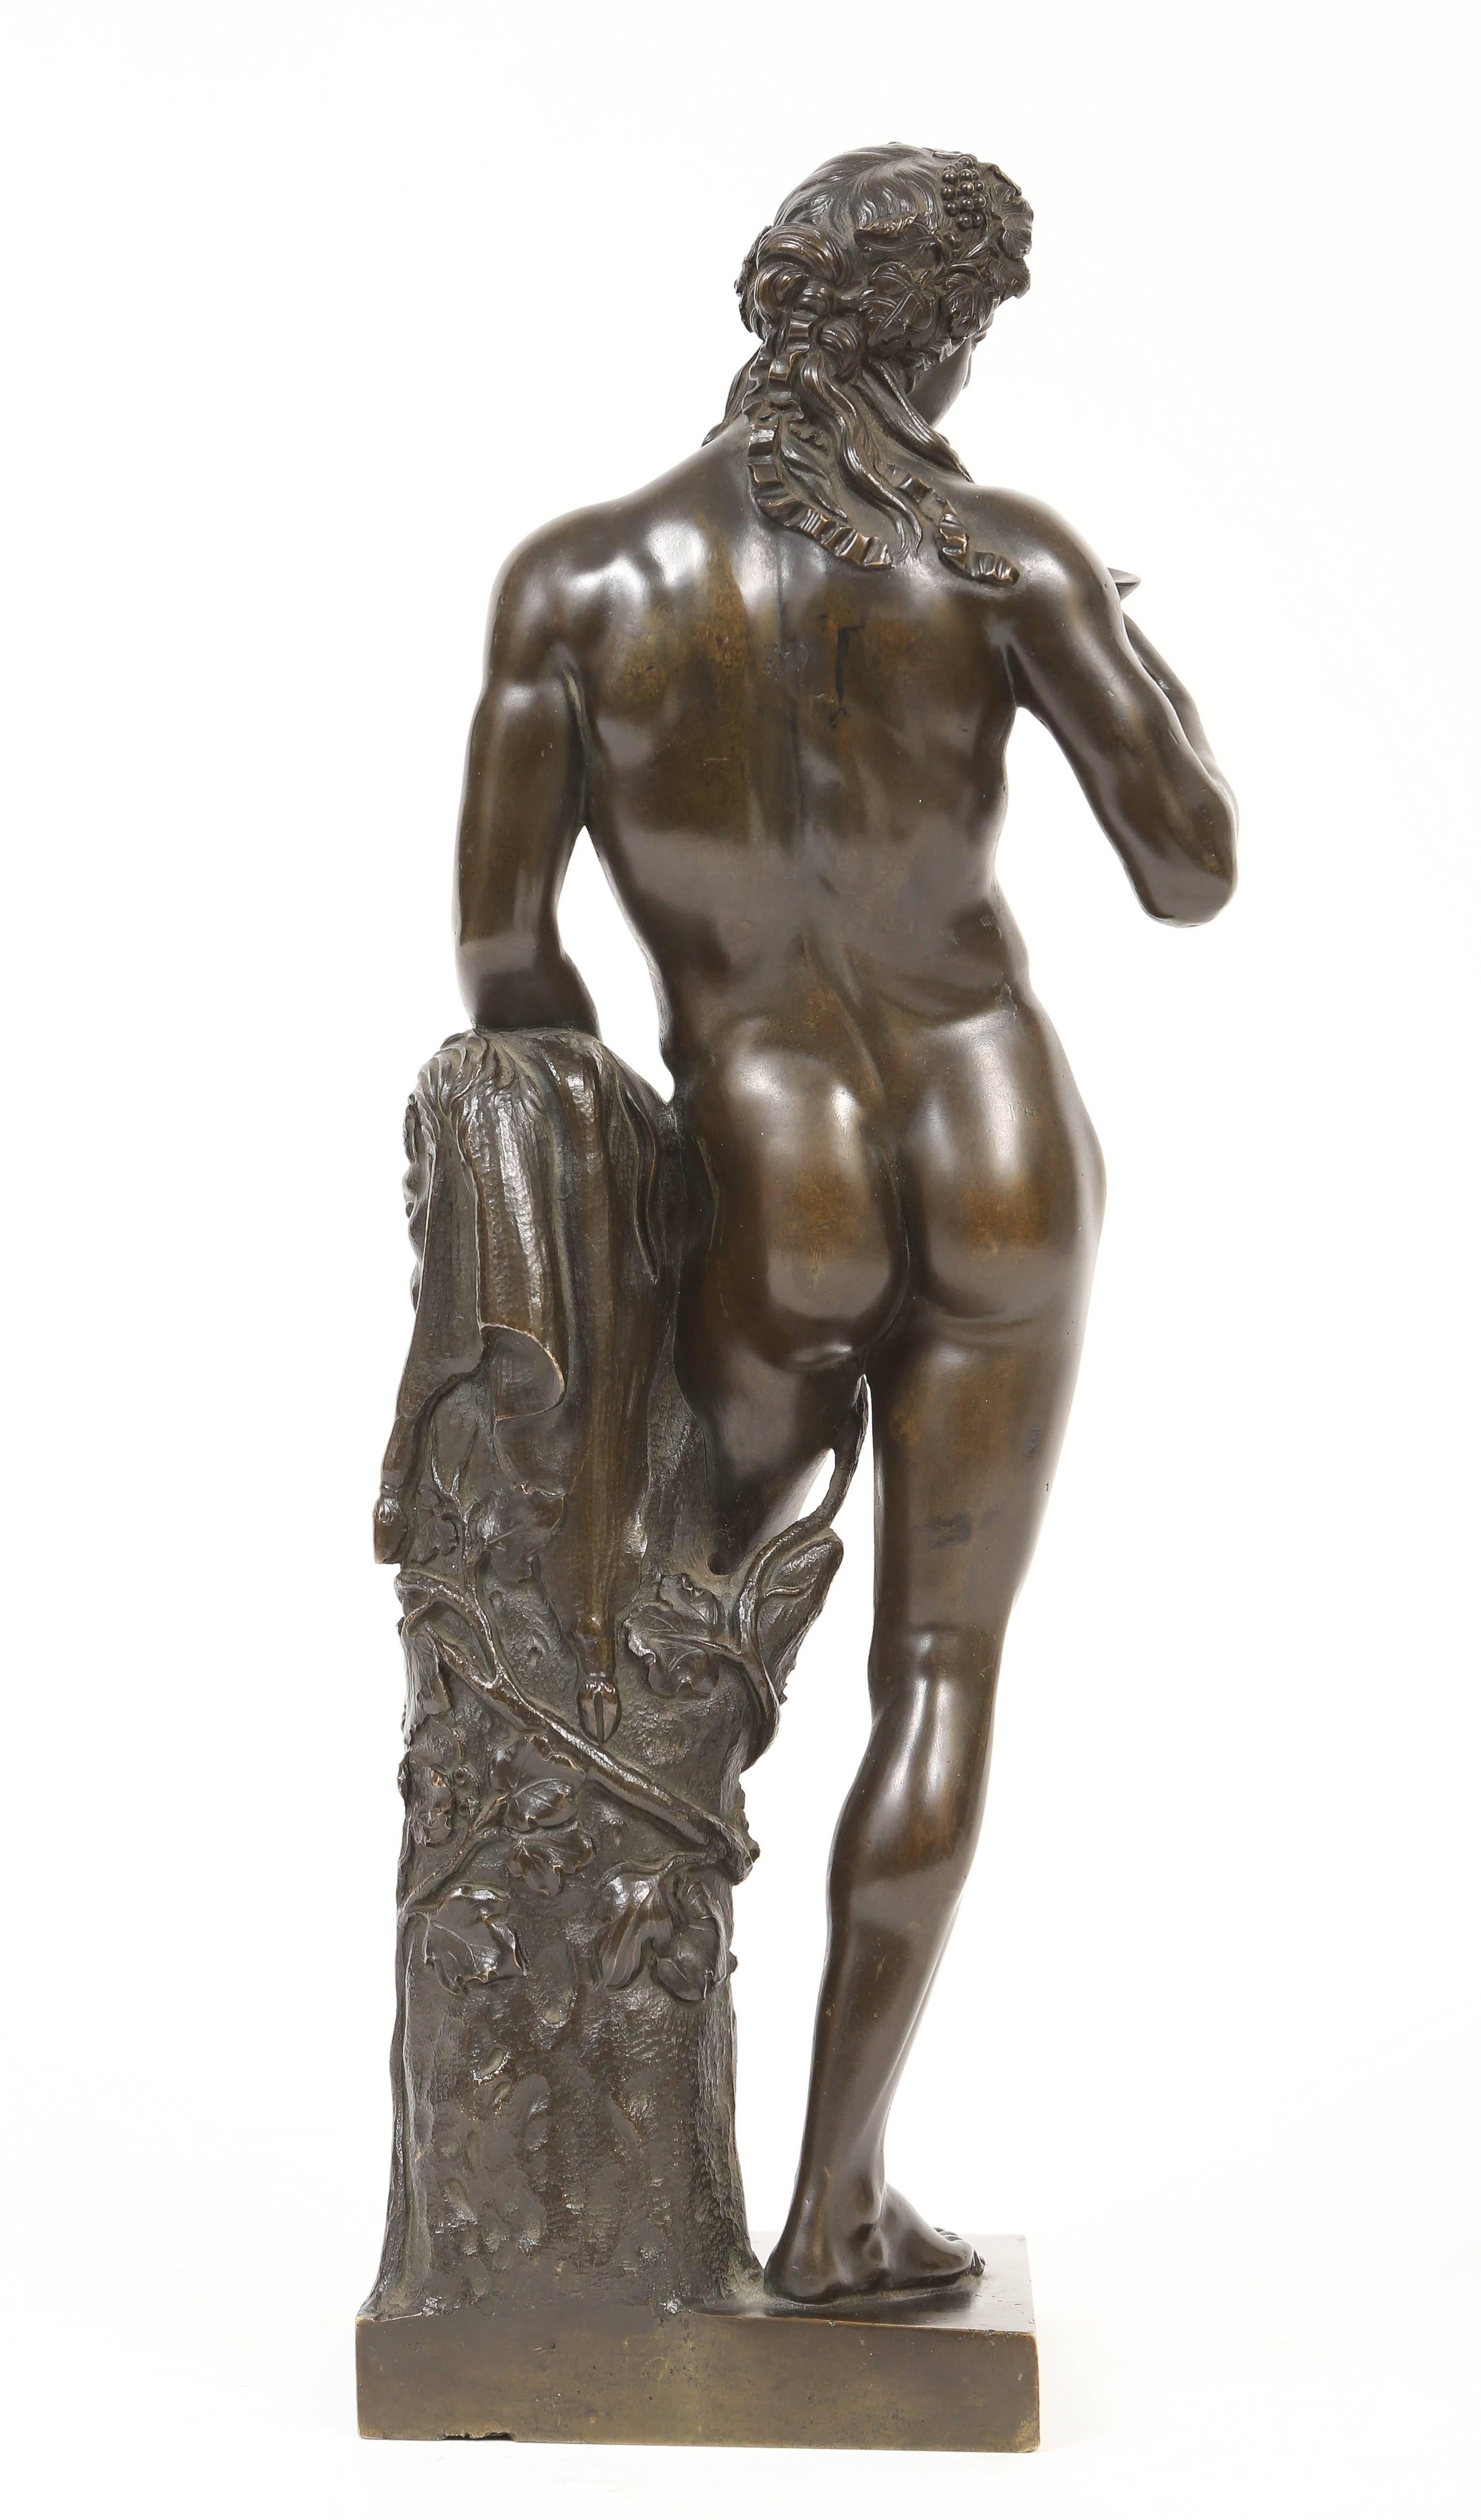 French 18th c. Bronze Statuette of Bacchus, After Michel Anguier and Louis Garnier